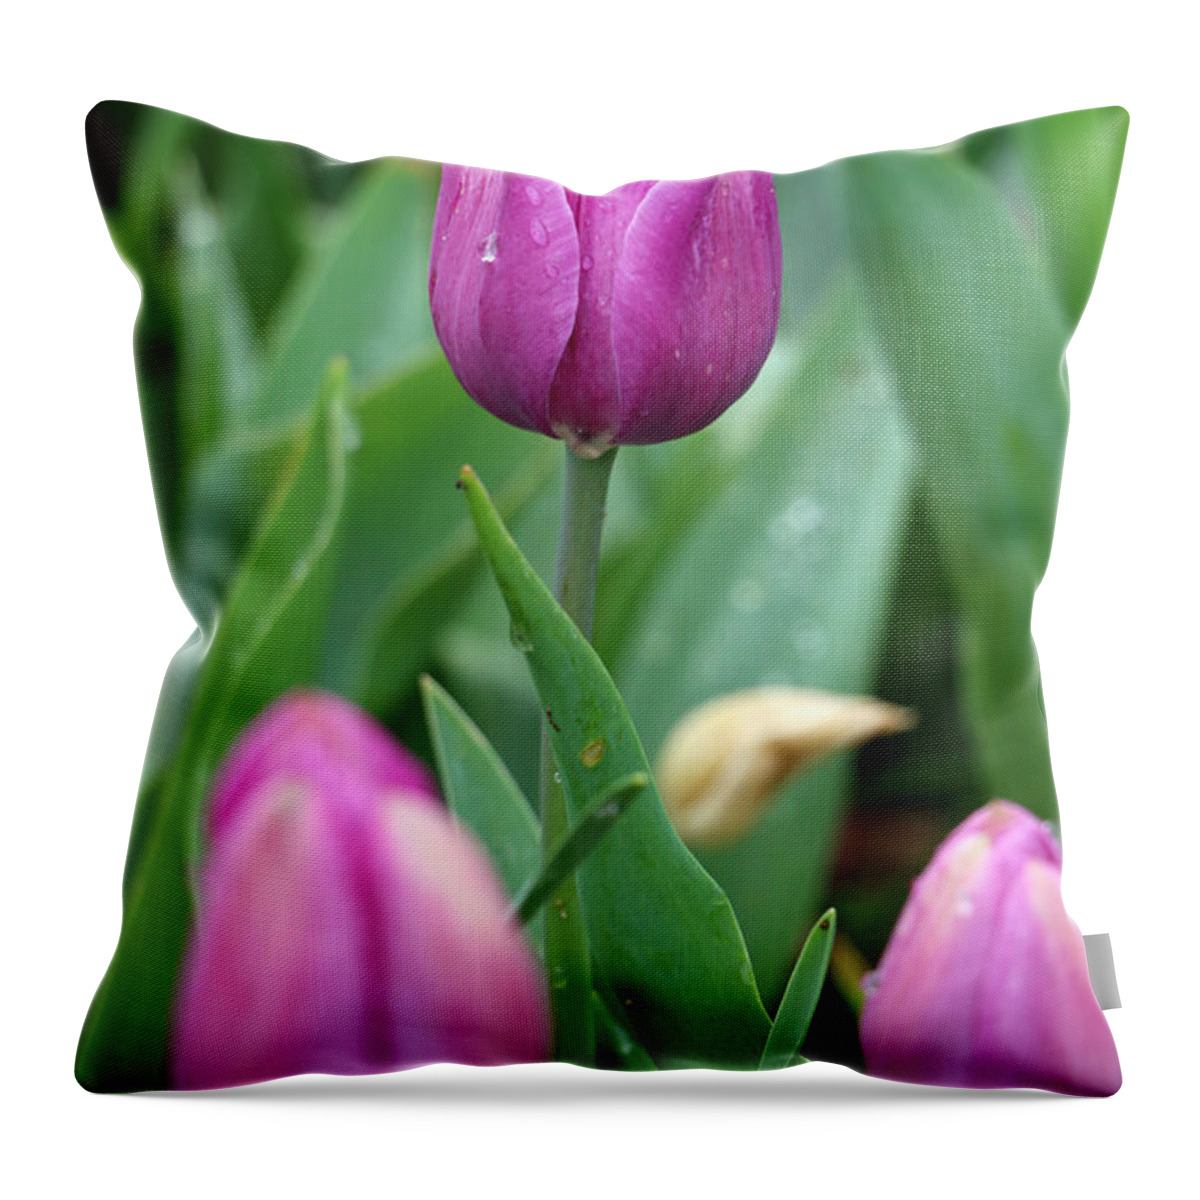 Tulip Throw Pillow featuring the photograph Spring Tulips 65 by Pamela Critchlow